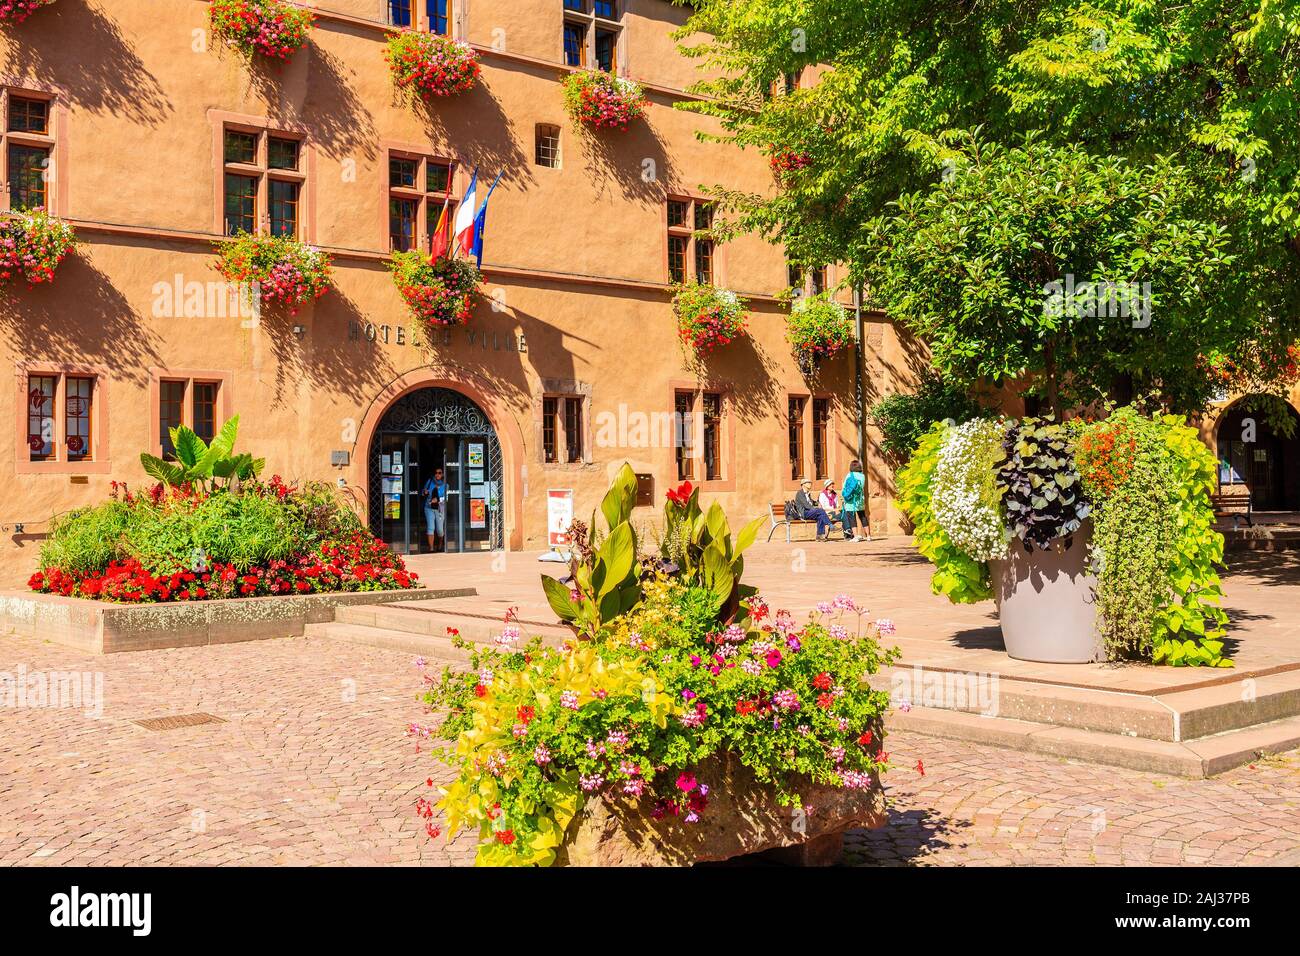 ALSACE WINE REGION, FRANCE - SEP 19, 2019: Square in Kaysersberg picturesque village which is located on Alsatian Wine Route, France. Stock Photo